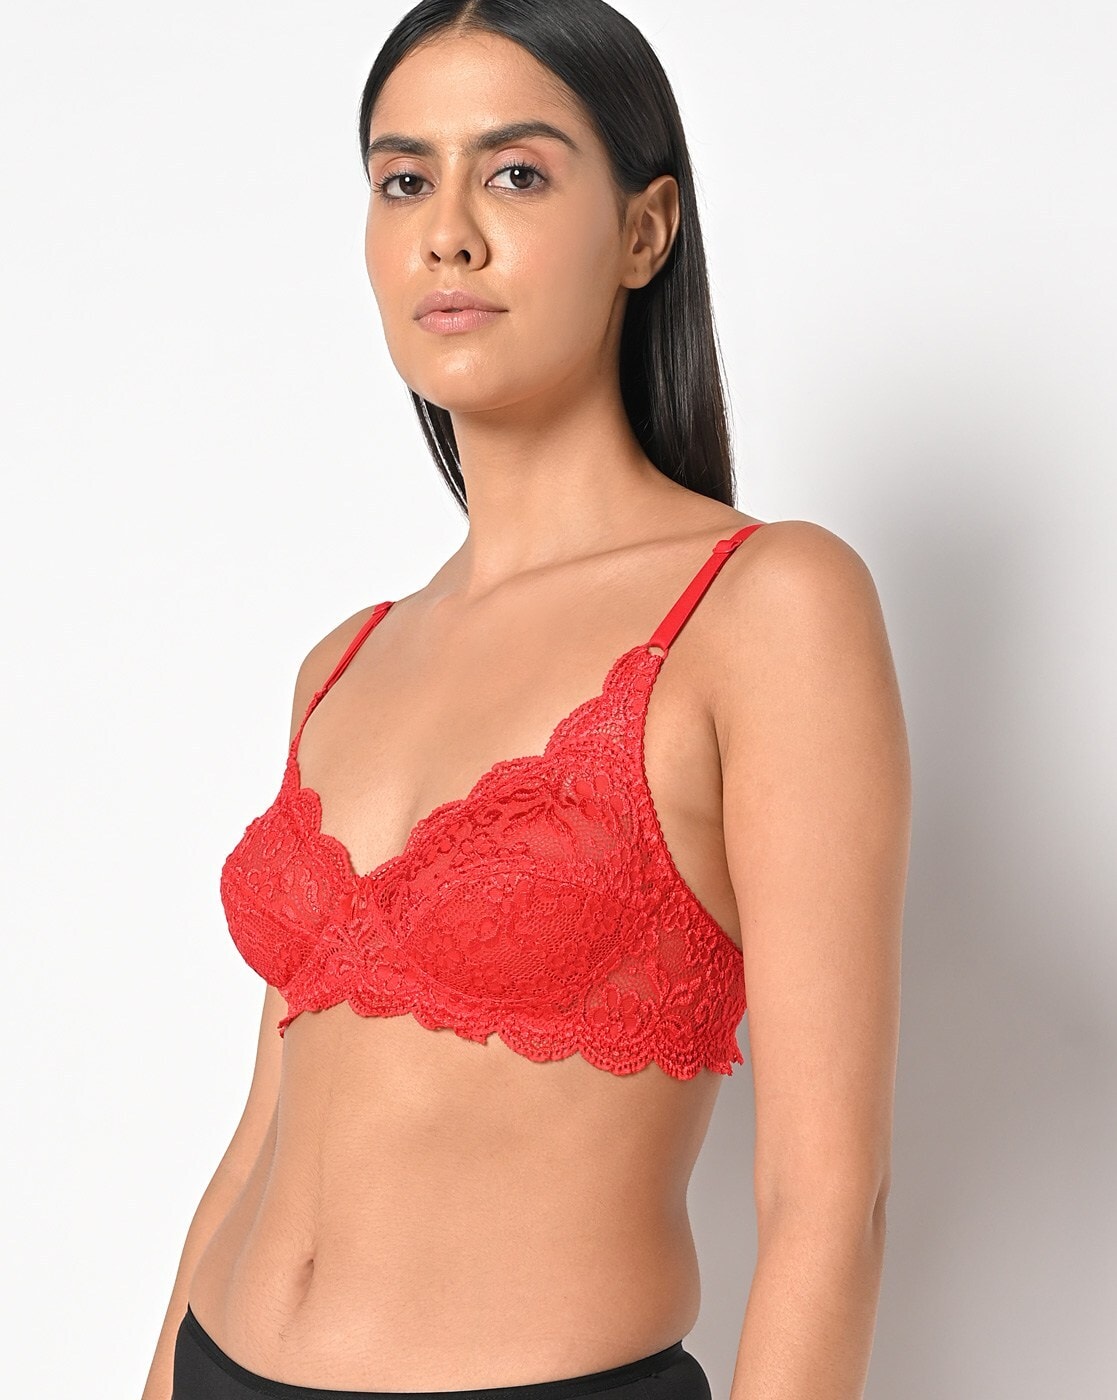 Buy Floret Women's Full Coverage Non Padded & Non-Wired Cotton Bra (B,  Wine, 42) at